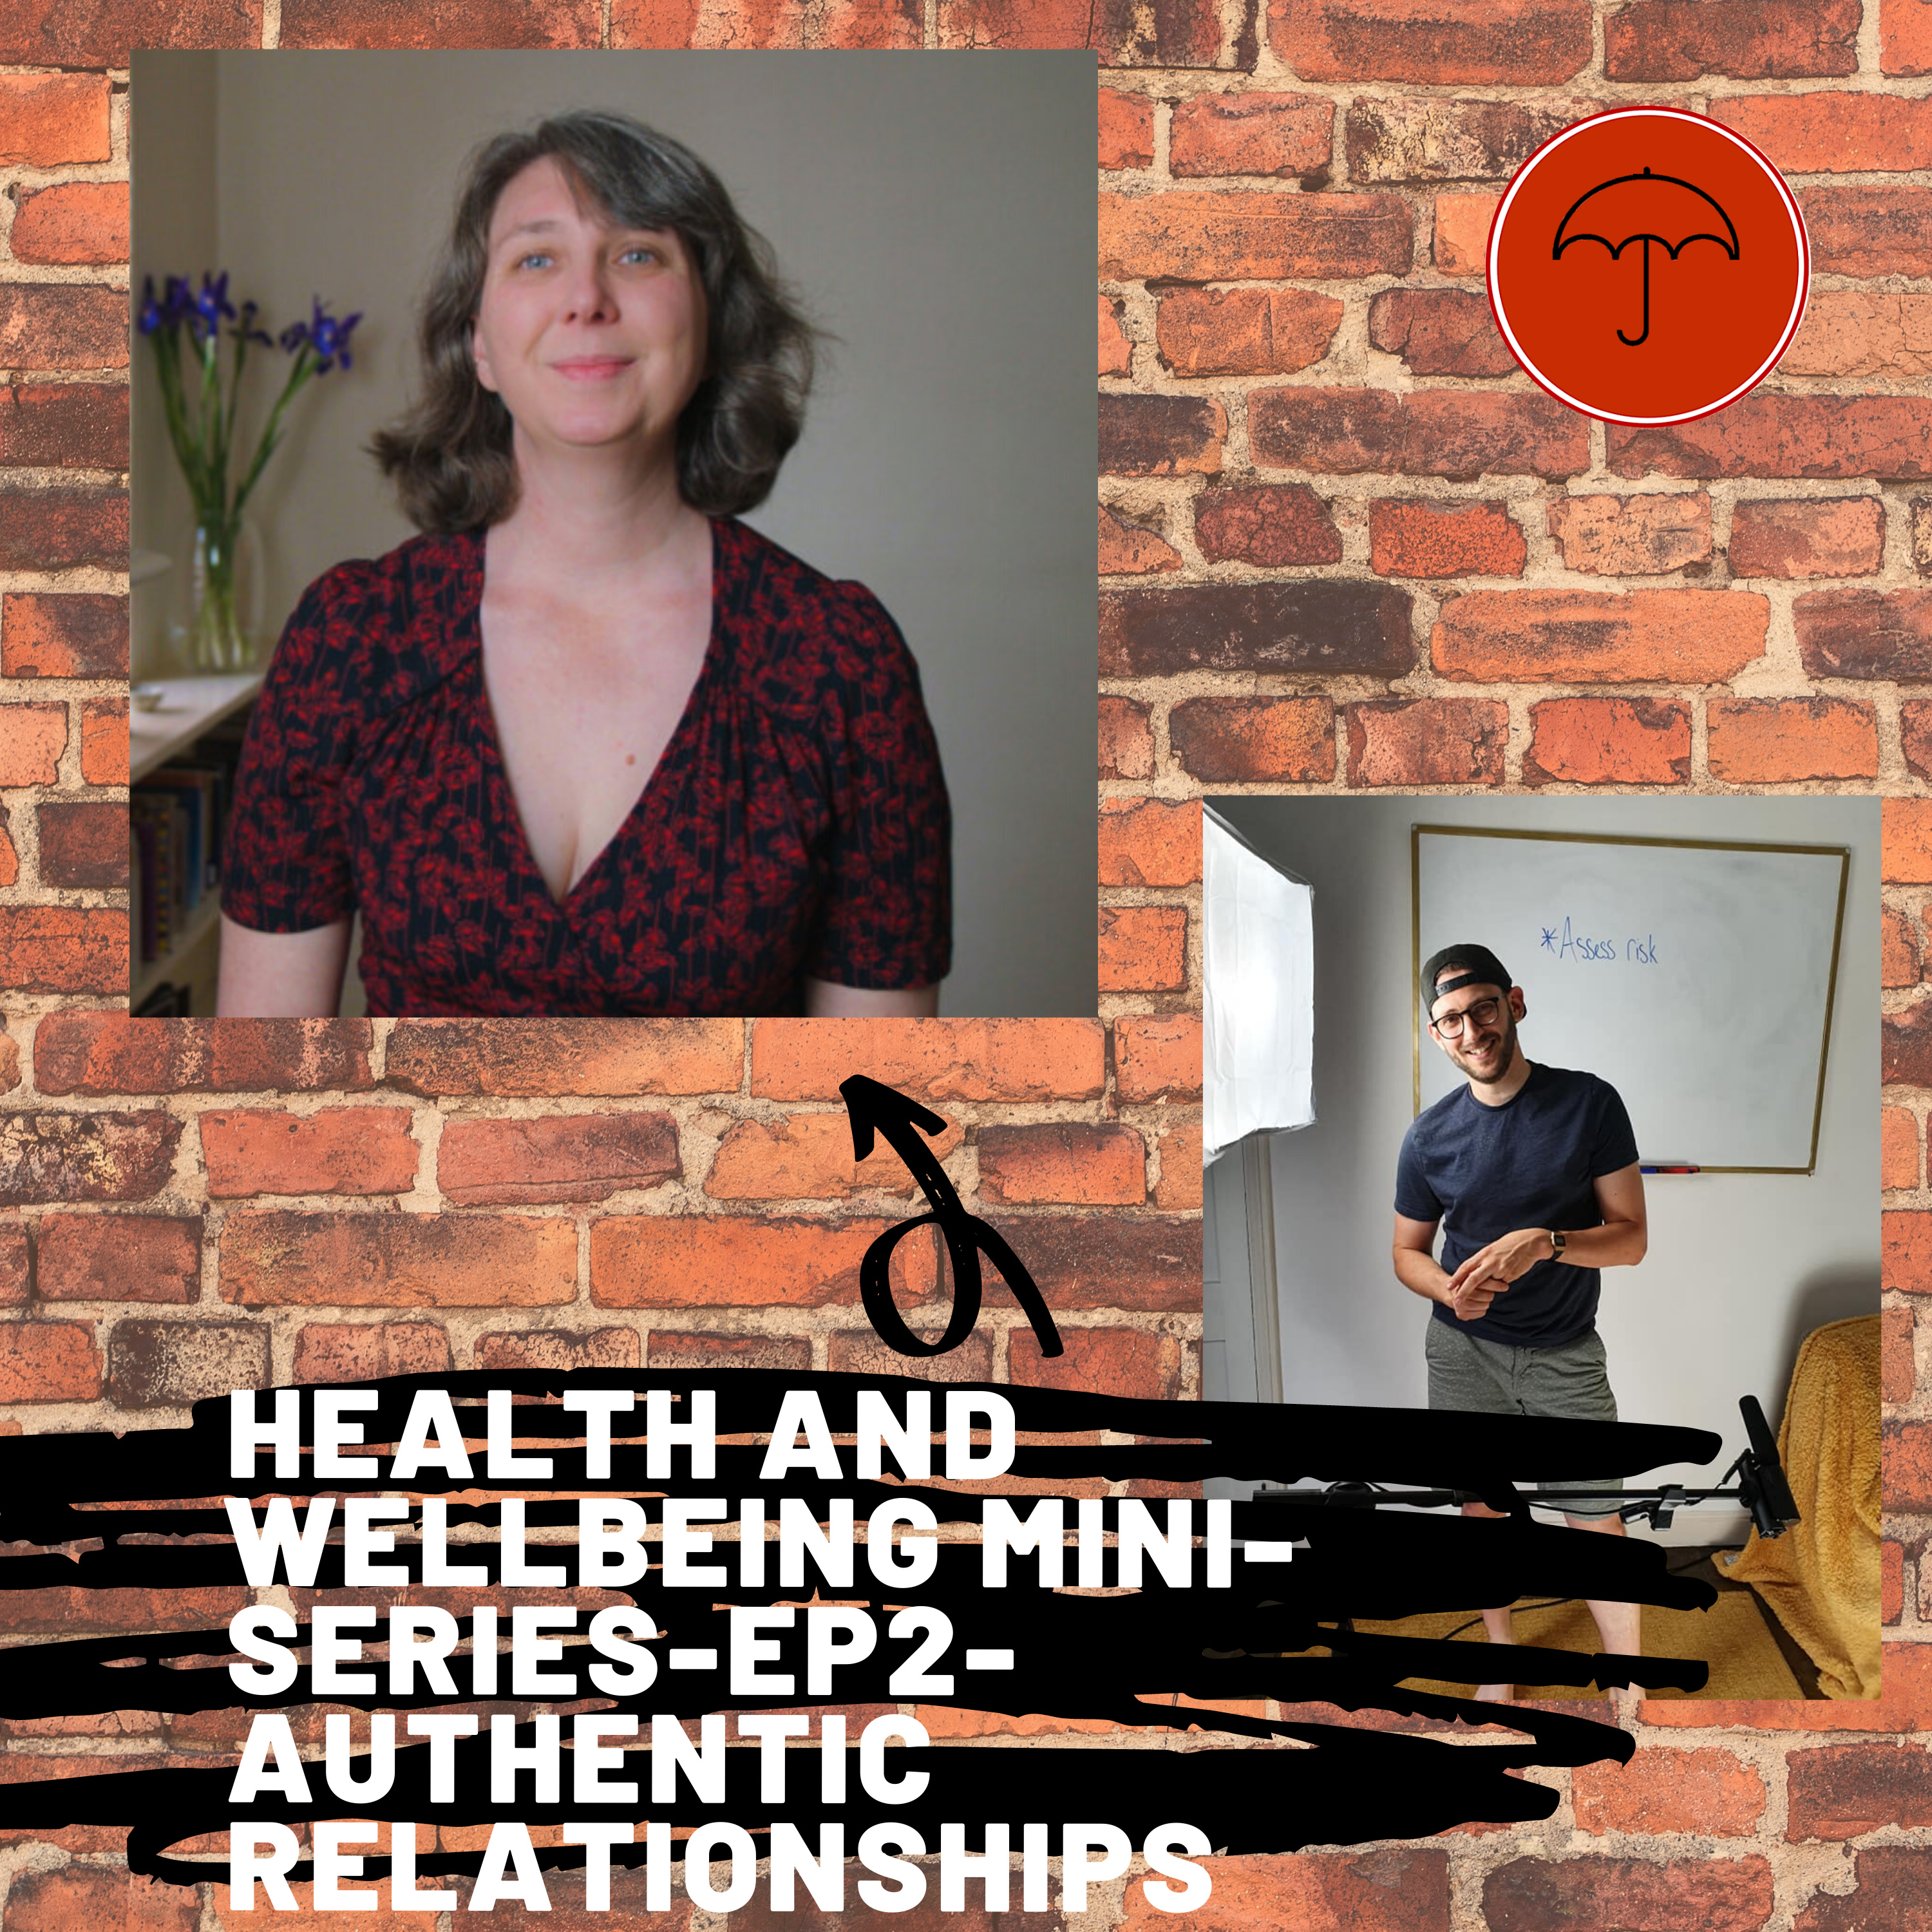 Building authentic relationships -Health and Wellbeing mini series part 2-Ep74